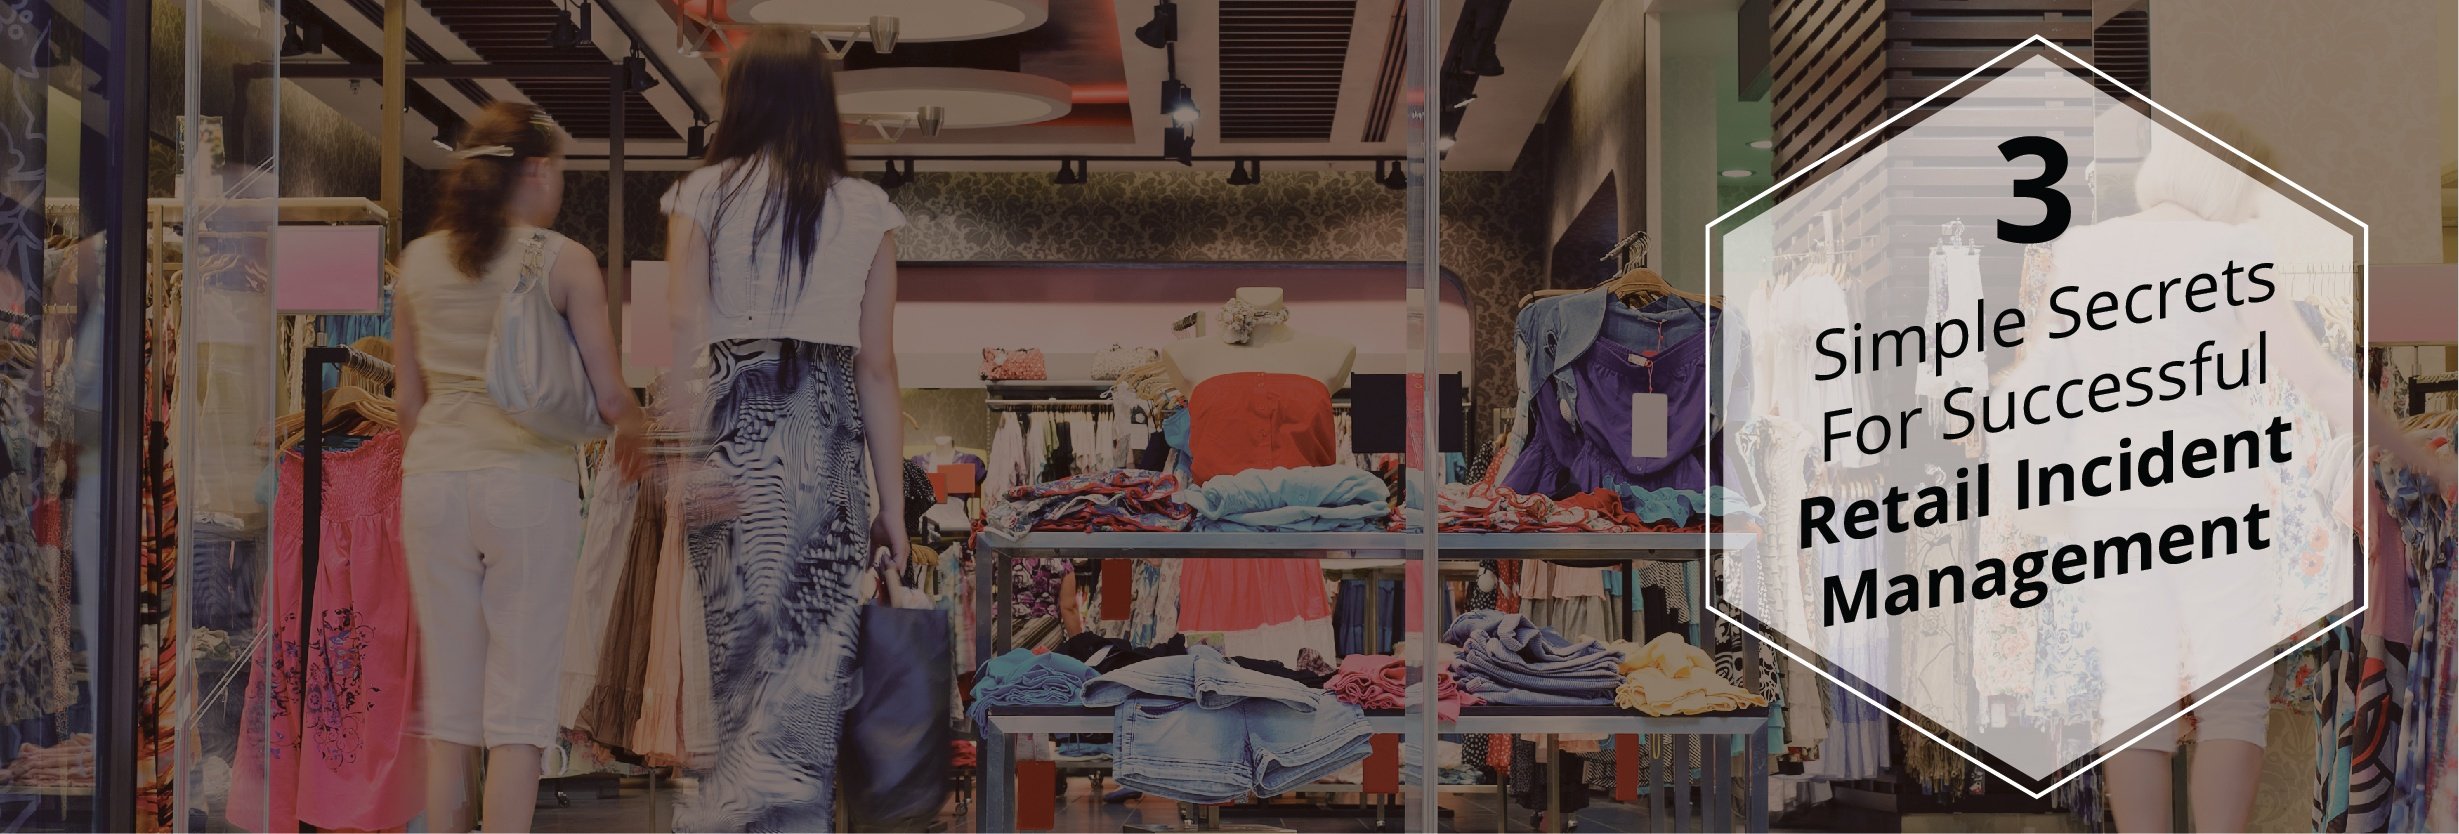 Three Simple Secrets For Successful Retail Incident Management